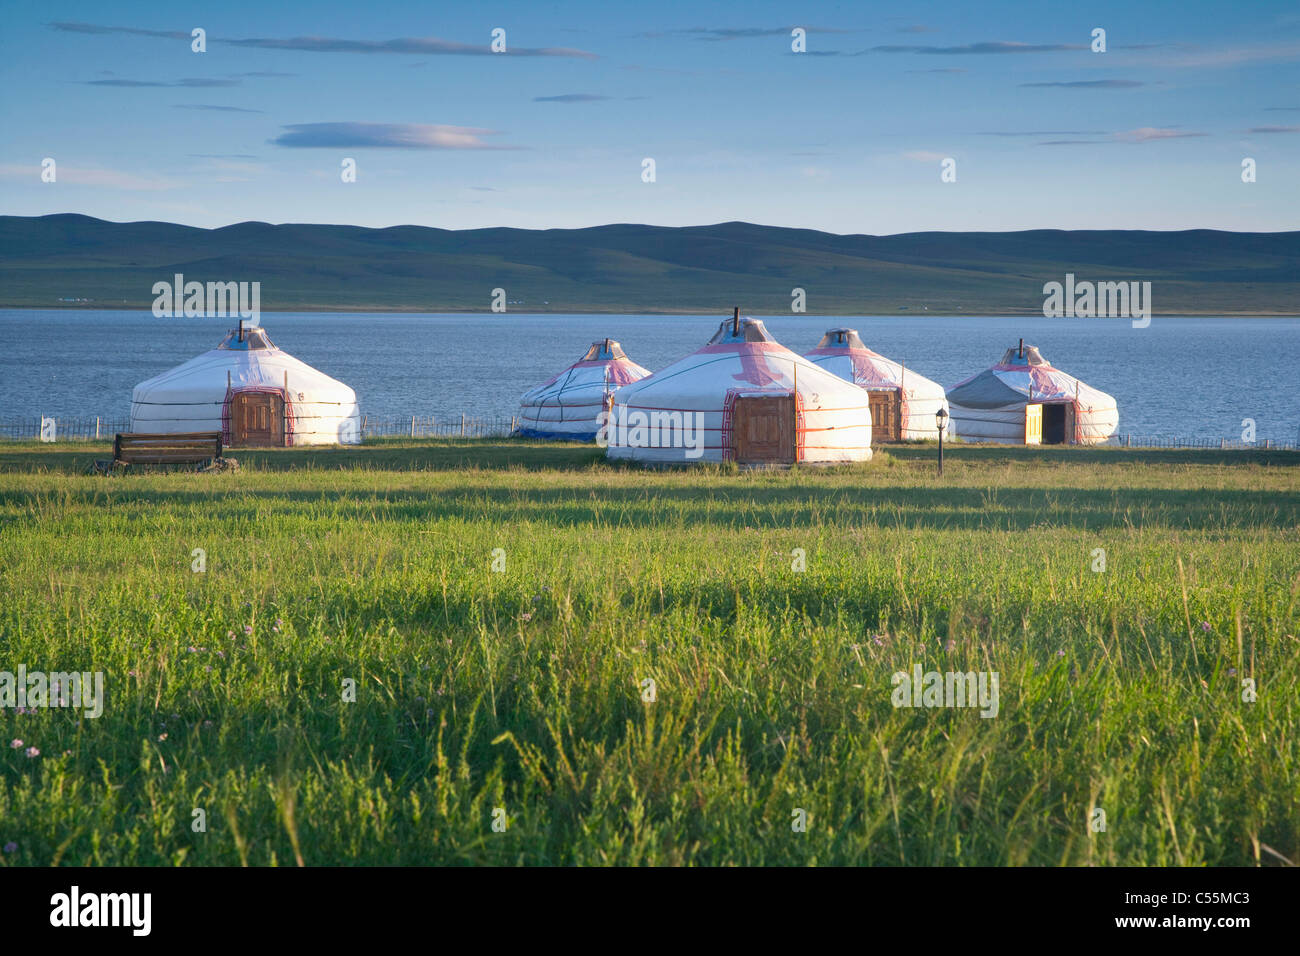 A group of yurts on an open grassy plain Stock Photo